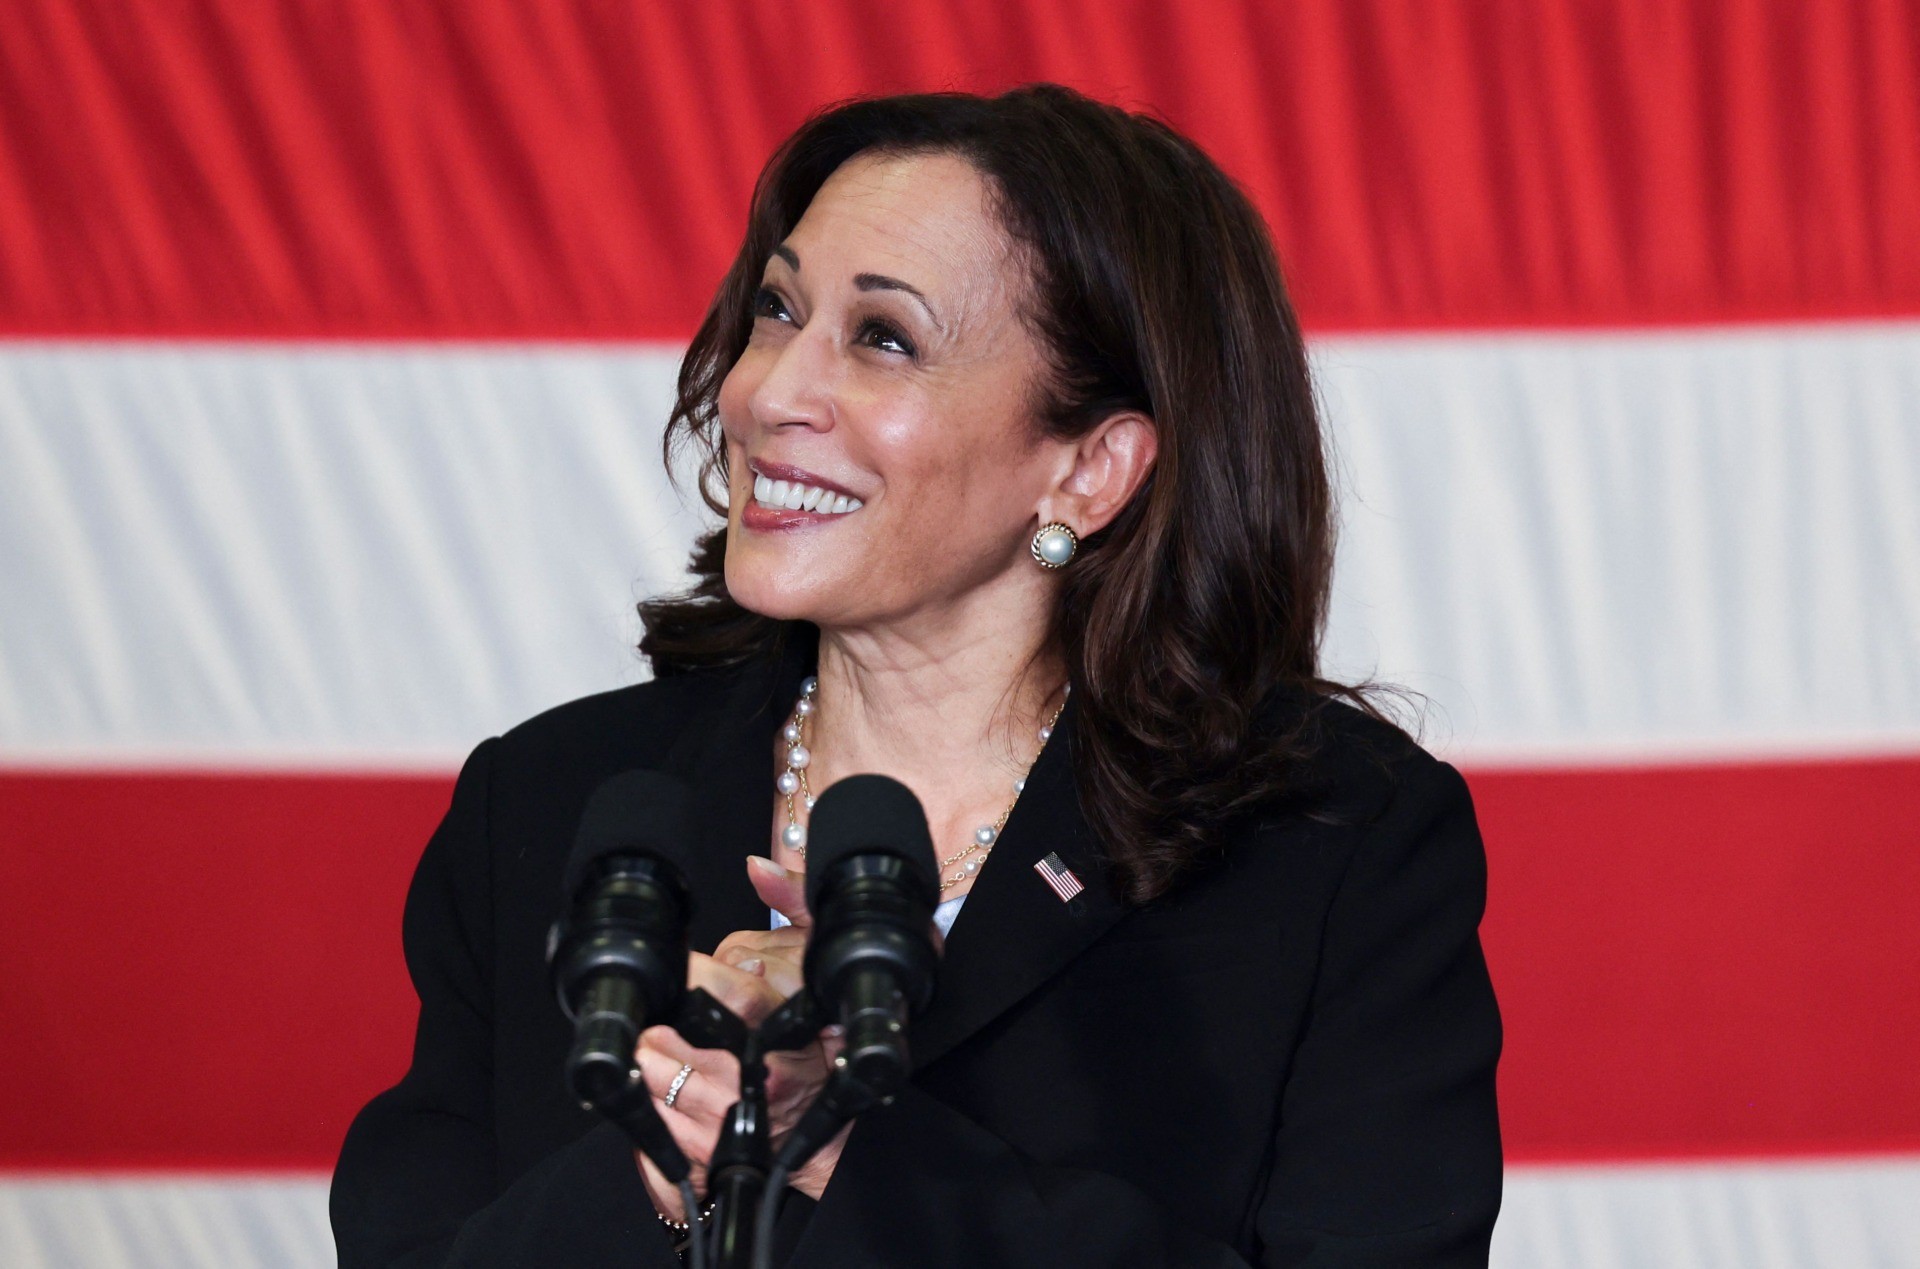 US Vice President Kamala Harris reacts as she speaks to troops during a visit to the USS Tulsa in Singapore on August 23, 2021. (Photo by EVELYN HOCKSTEIN / POOL / AFP) (Photo by EVELYN HOCKSTEIN/POOL/AFP via Getty Images)